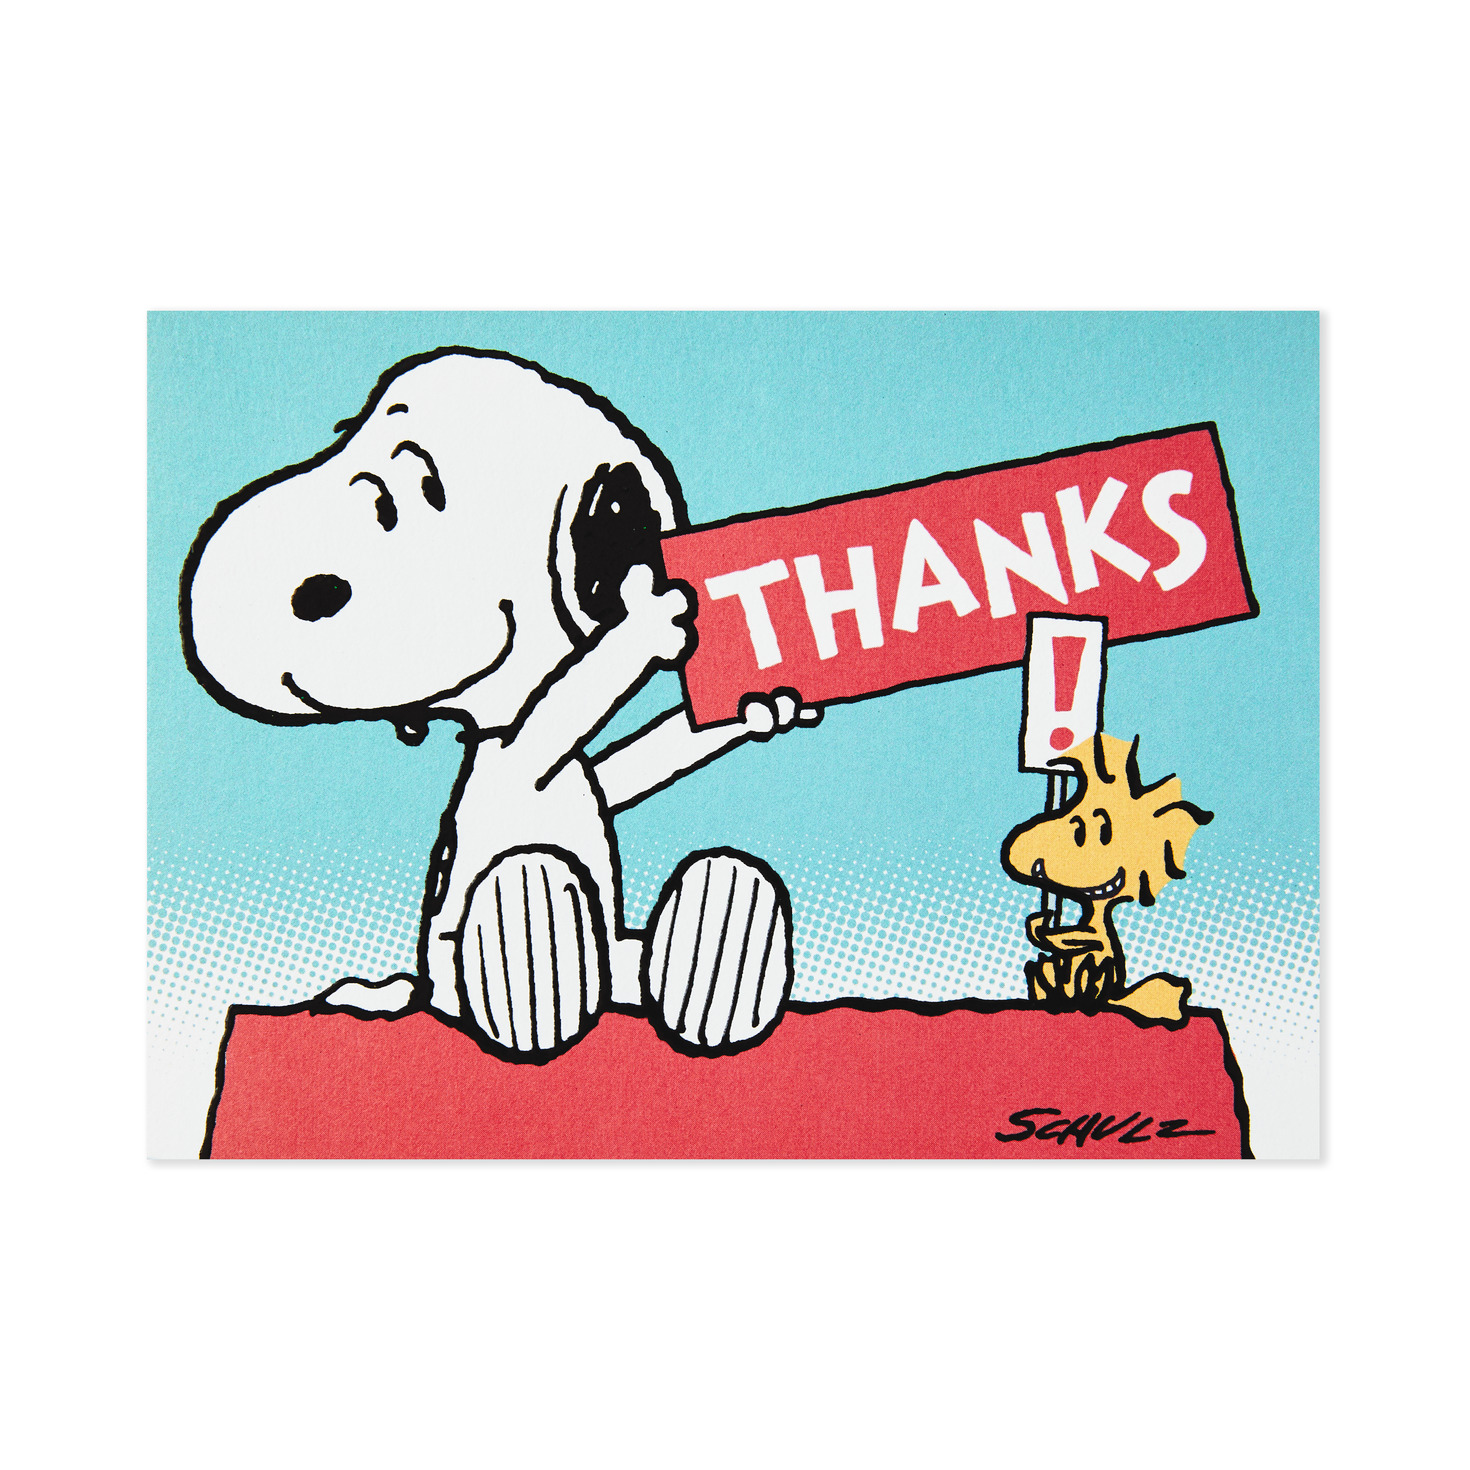 Peanuts Snoopy And Woodstock Blank Thank You Notes Pack Of 10 Note Cards Hallmark